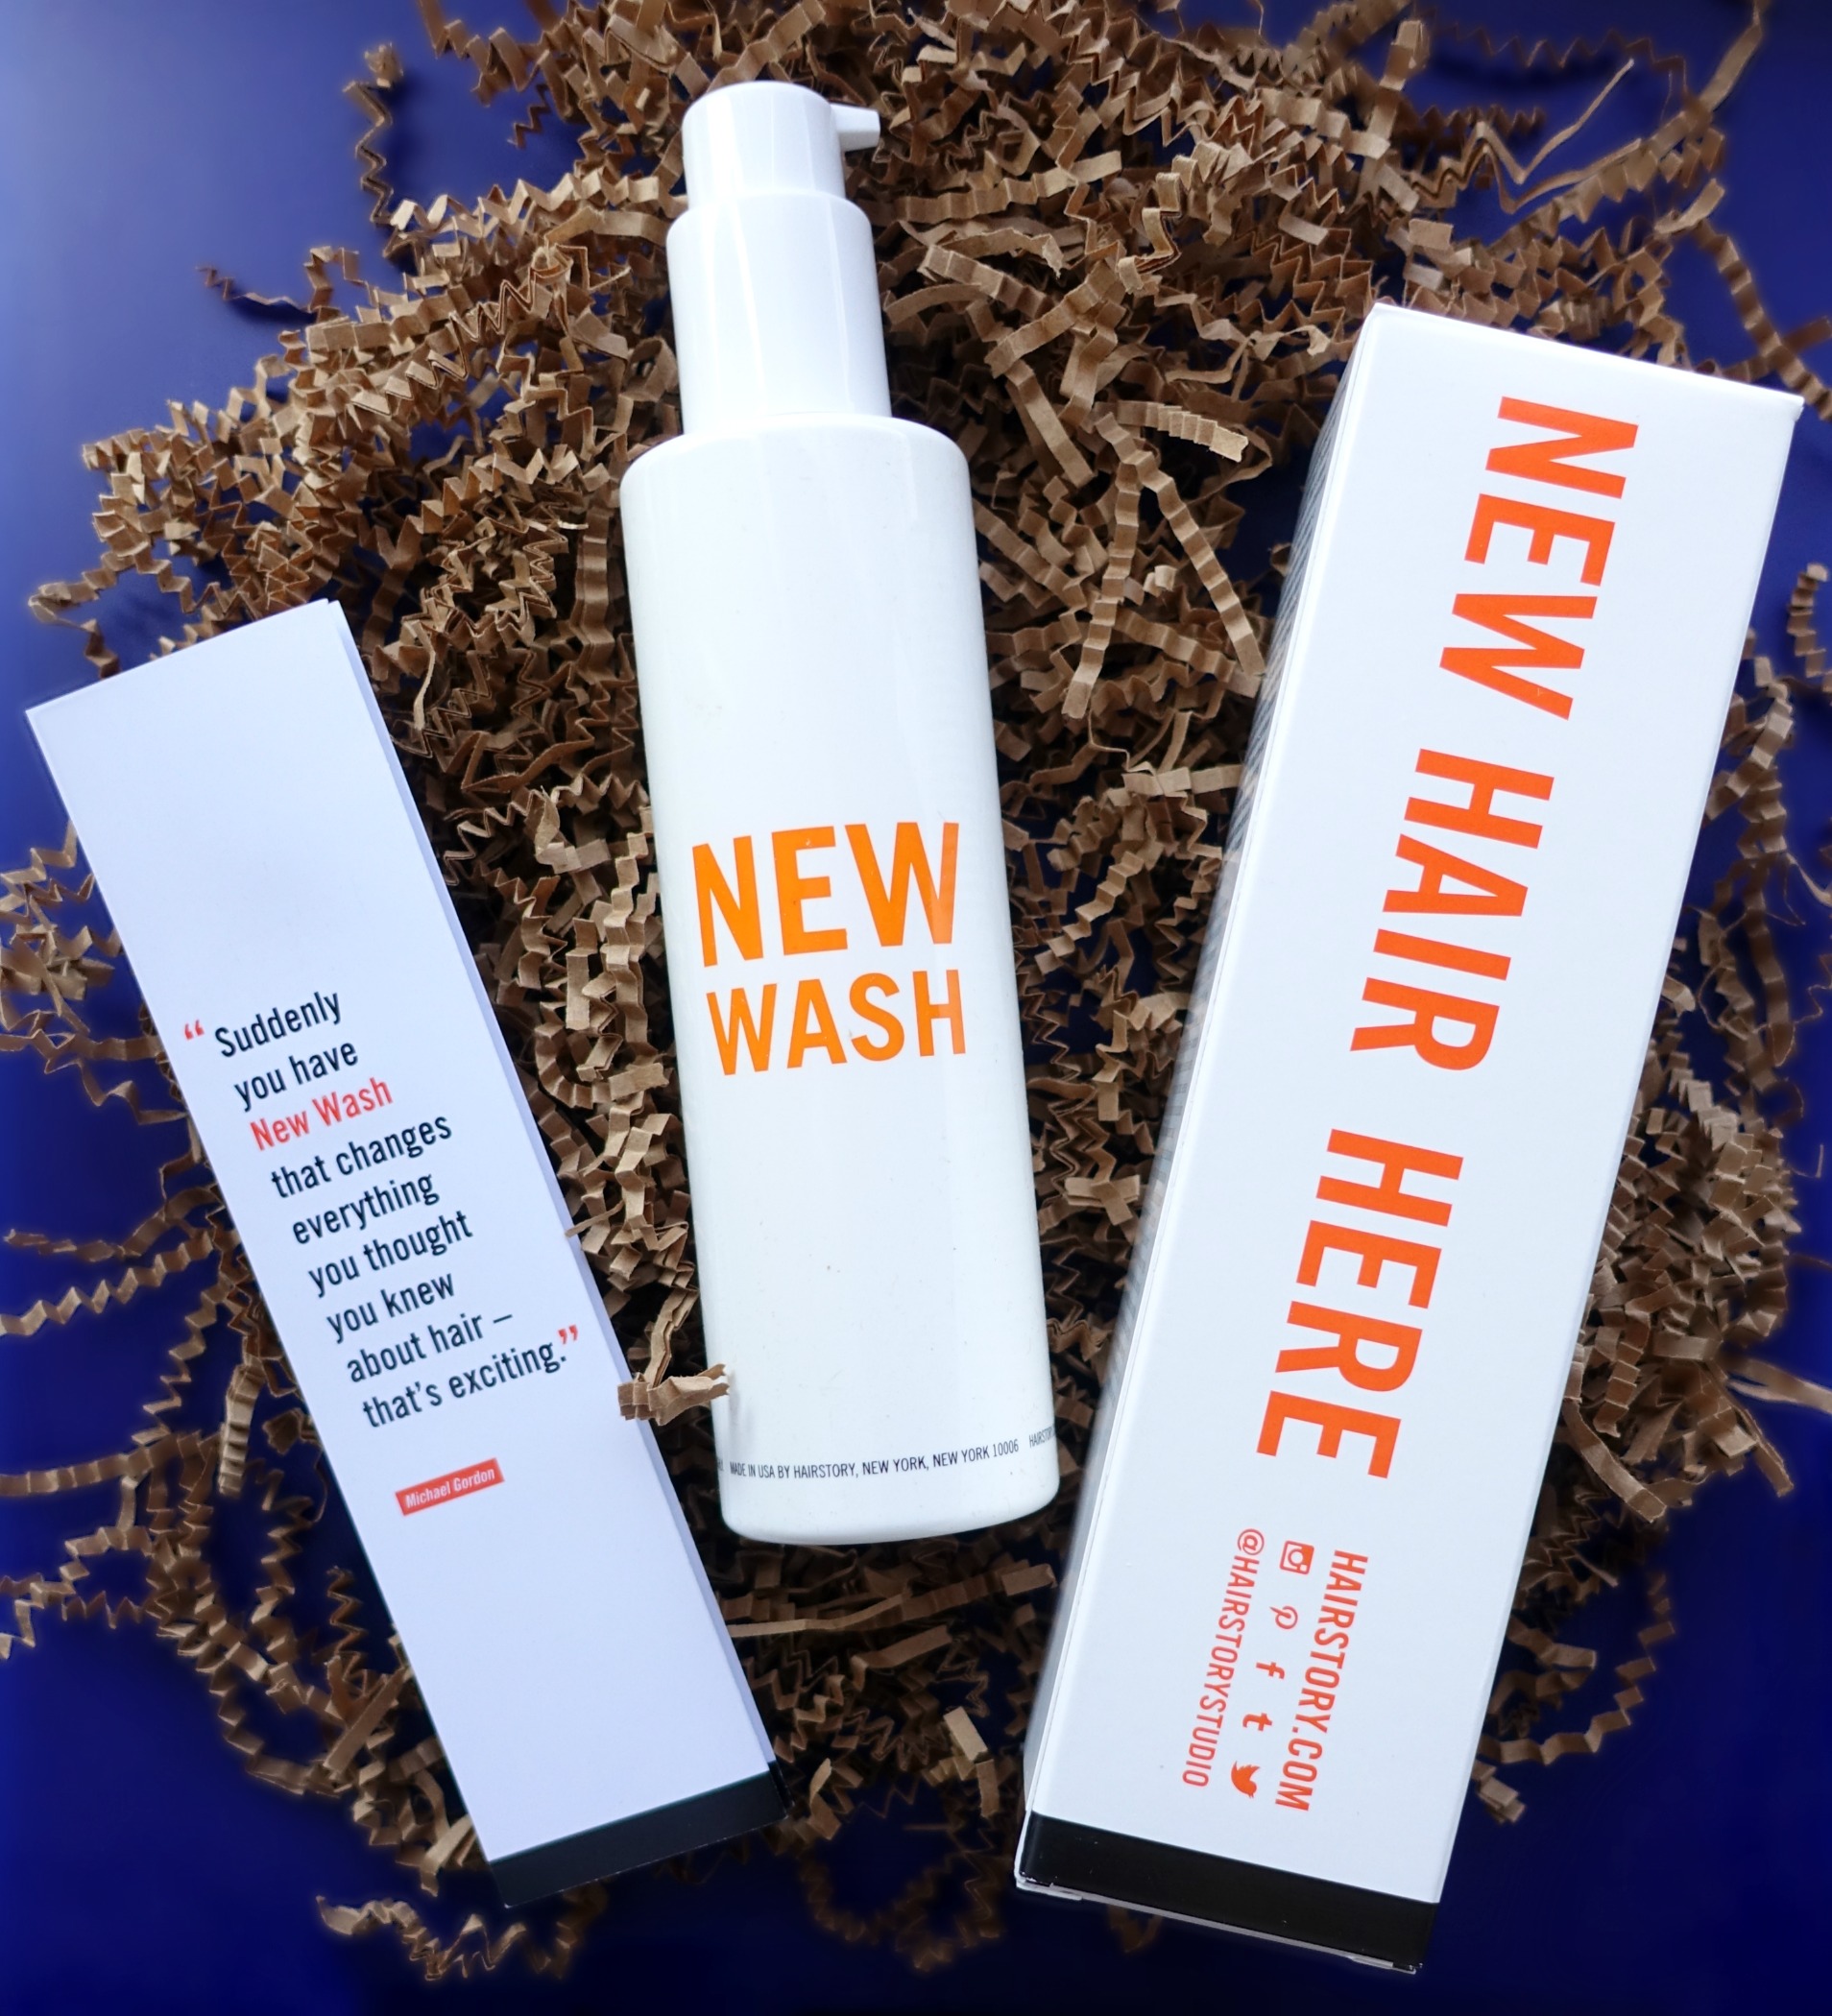 How to Co-Wash Your Hair + Hairstory New Wash Review